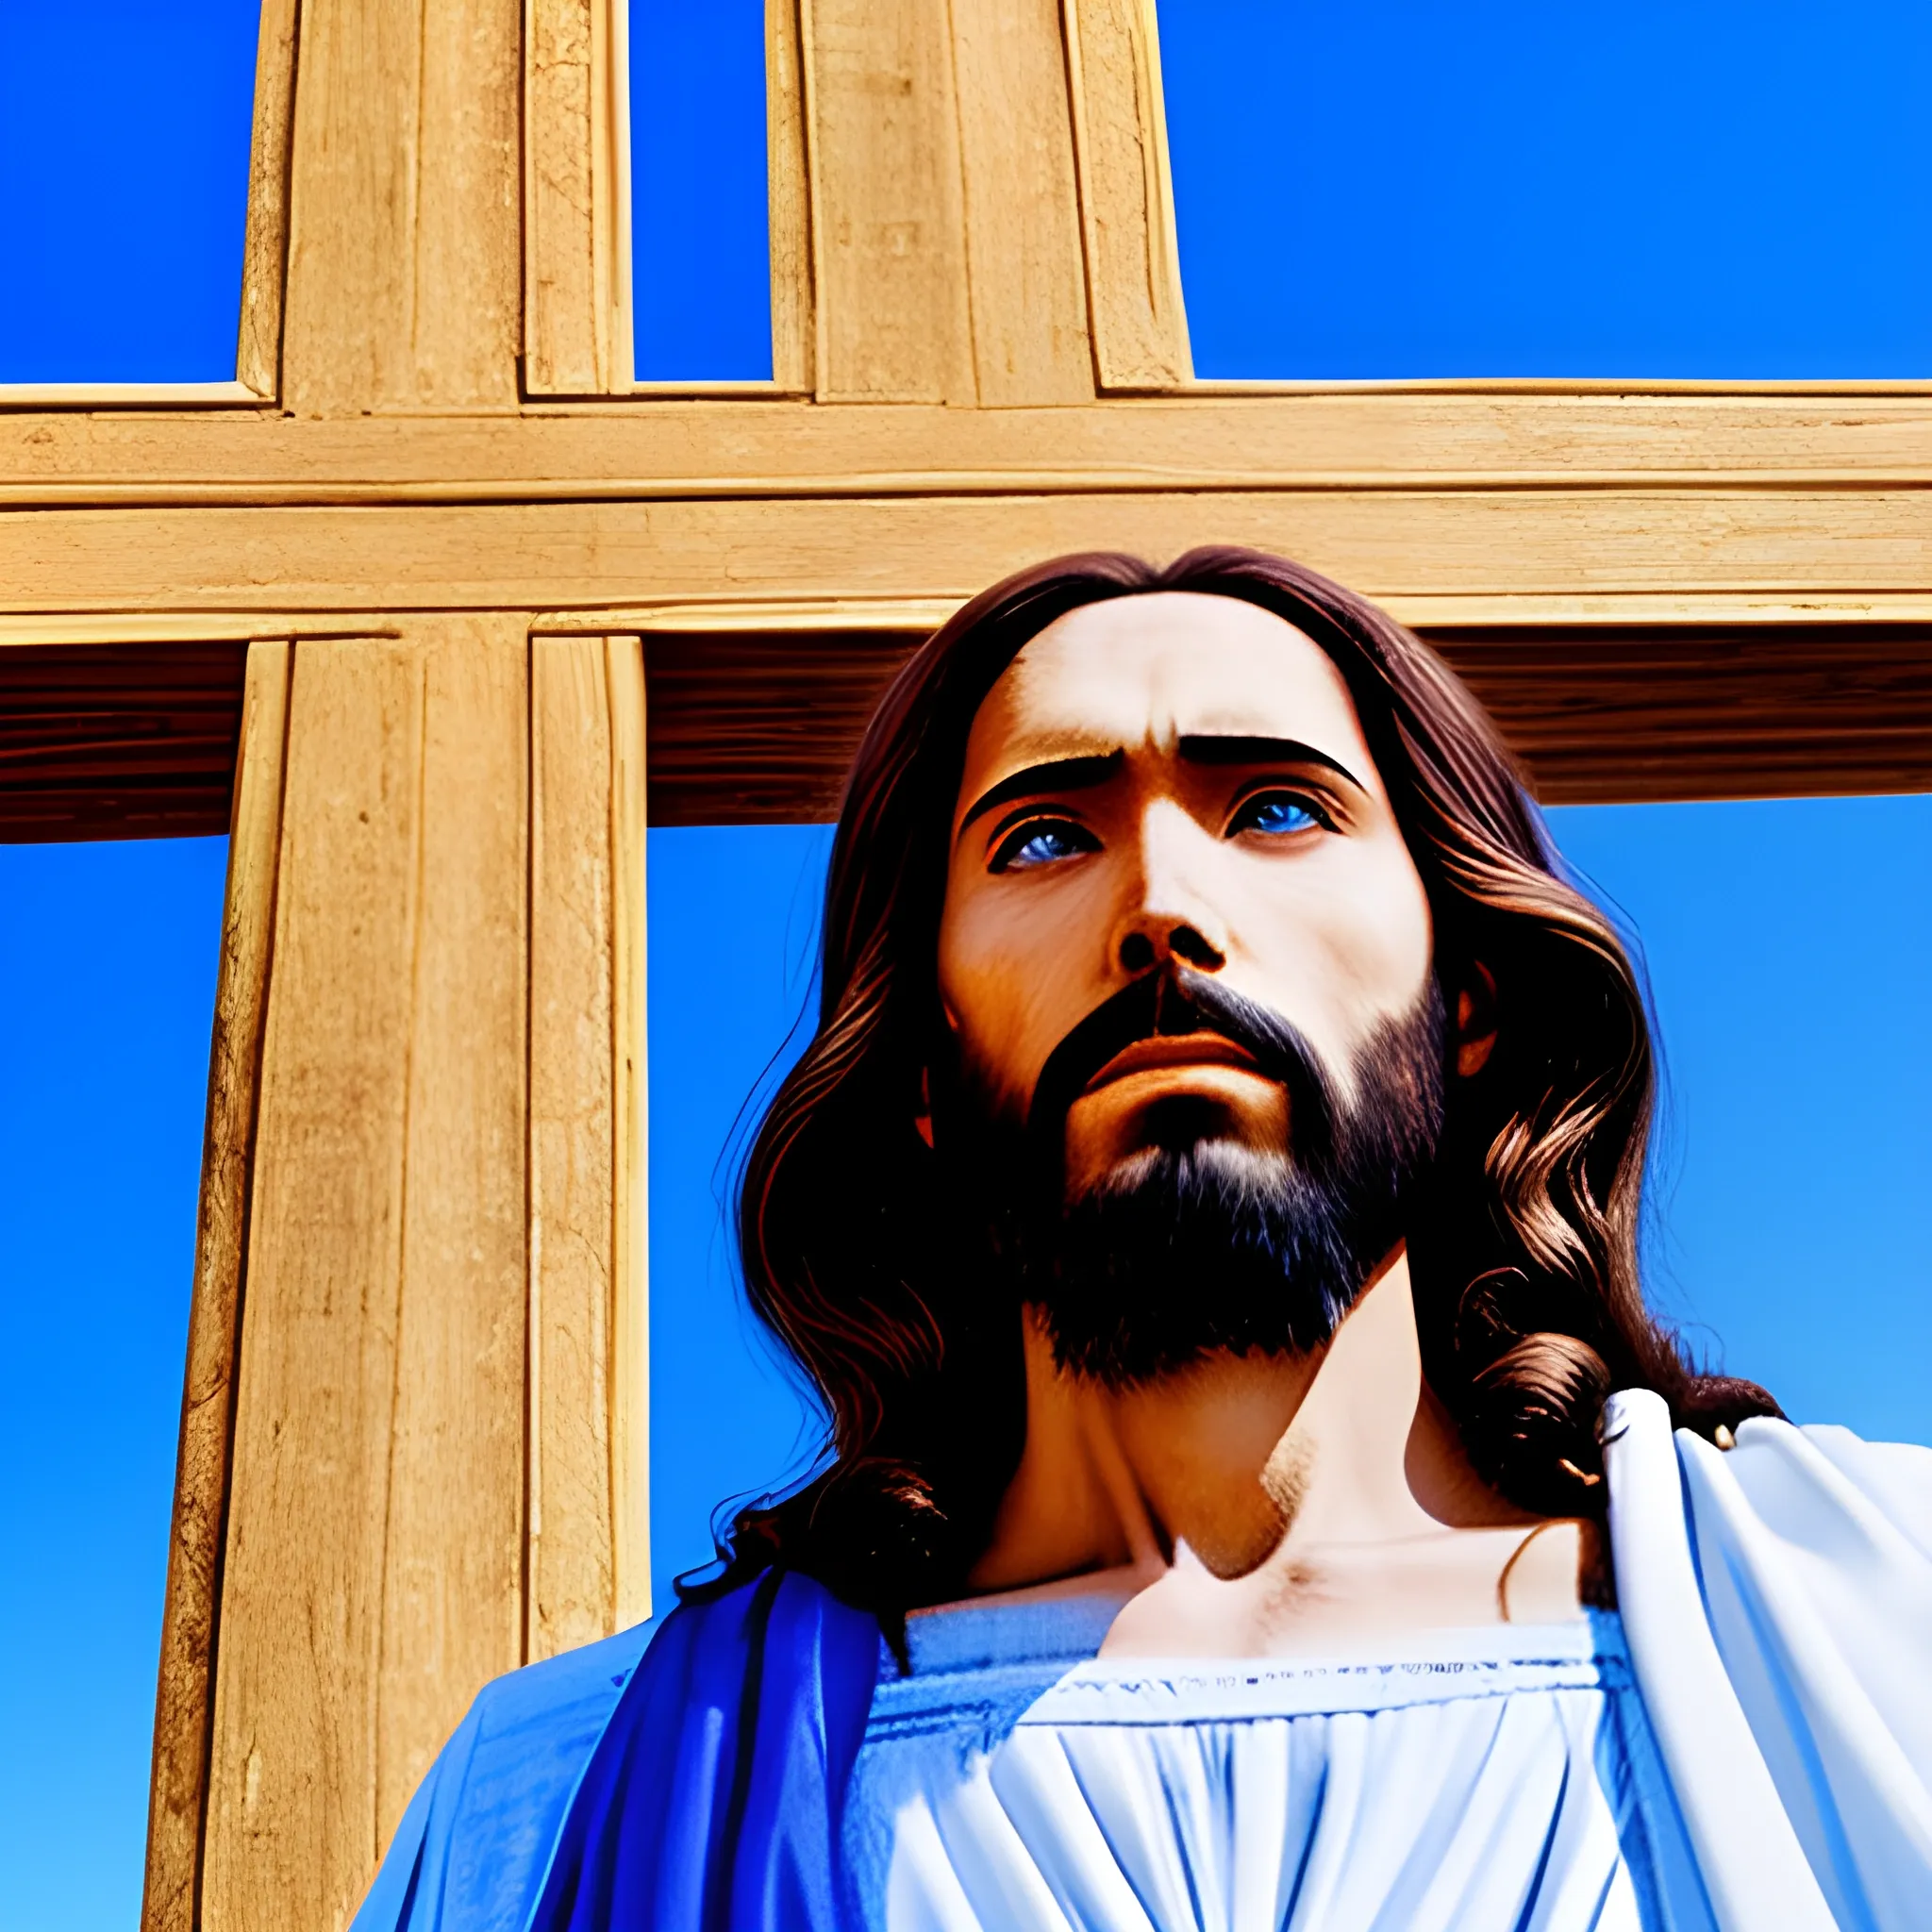 photo of Jesus chist at the cross with a blue sky as a fond
